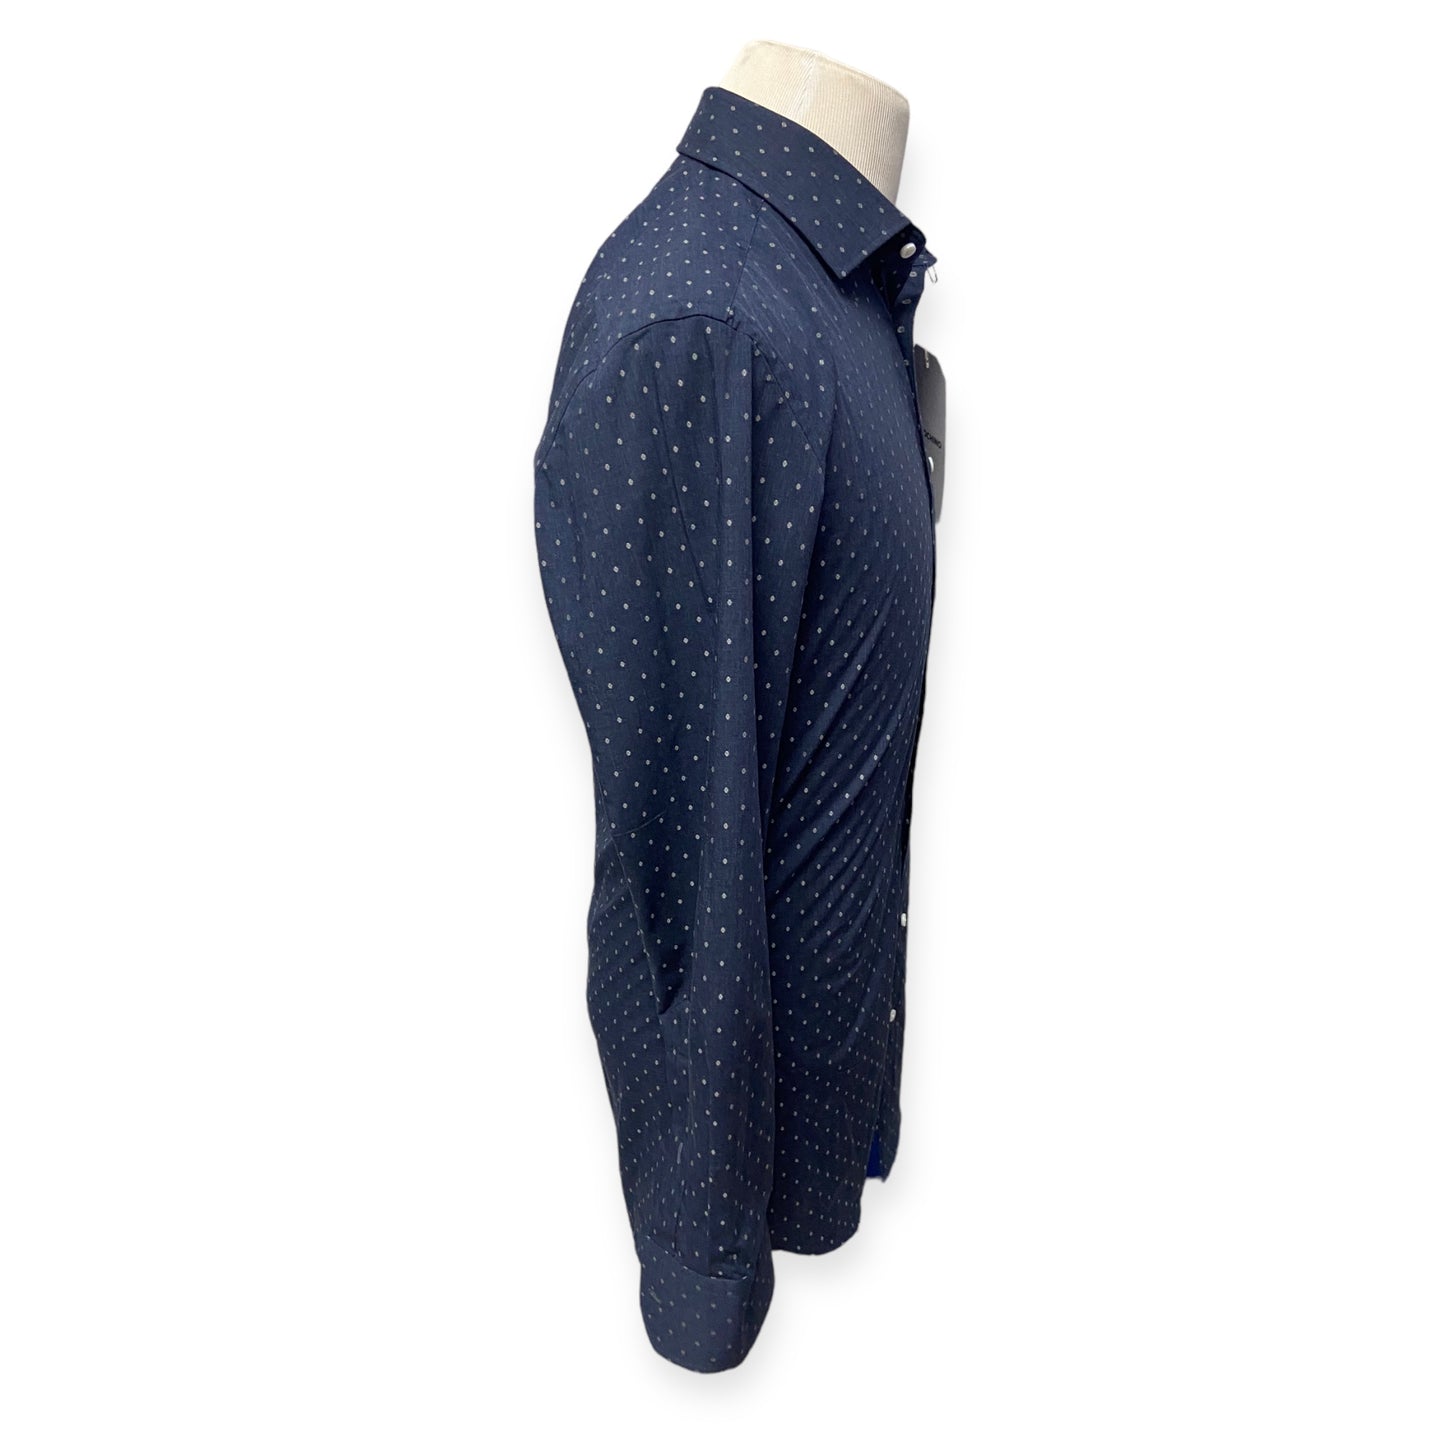 Indochino East Leigh Navy Dobby Button Down Dress Shirt (size S)